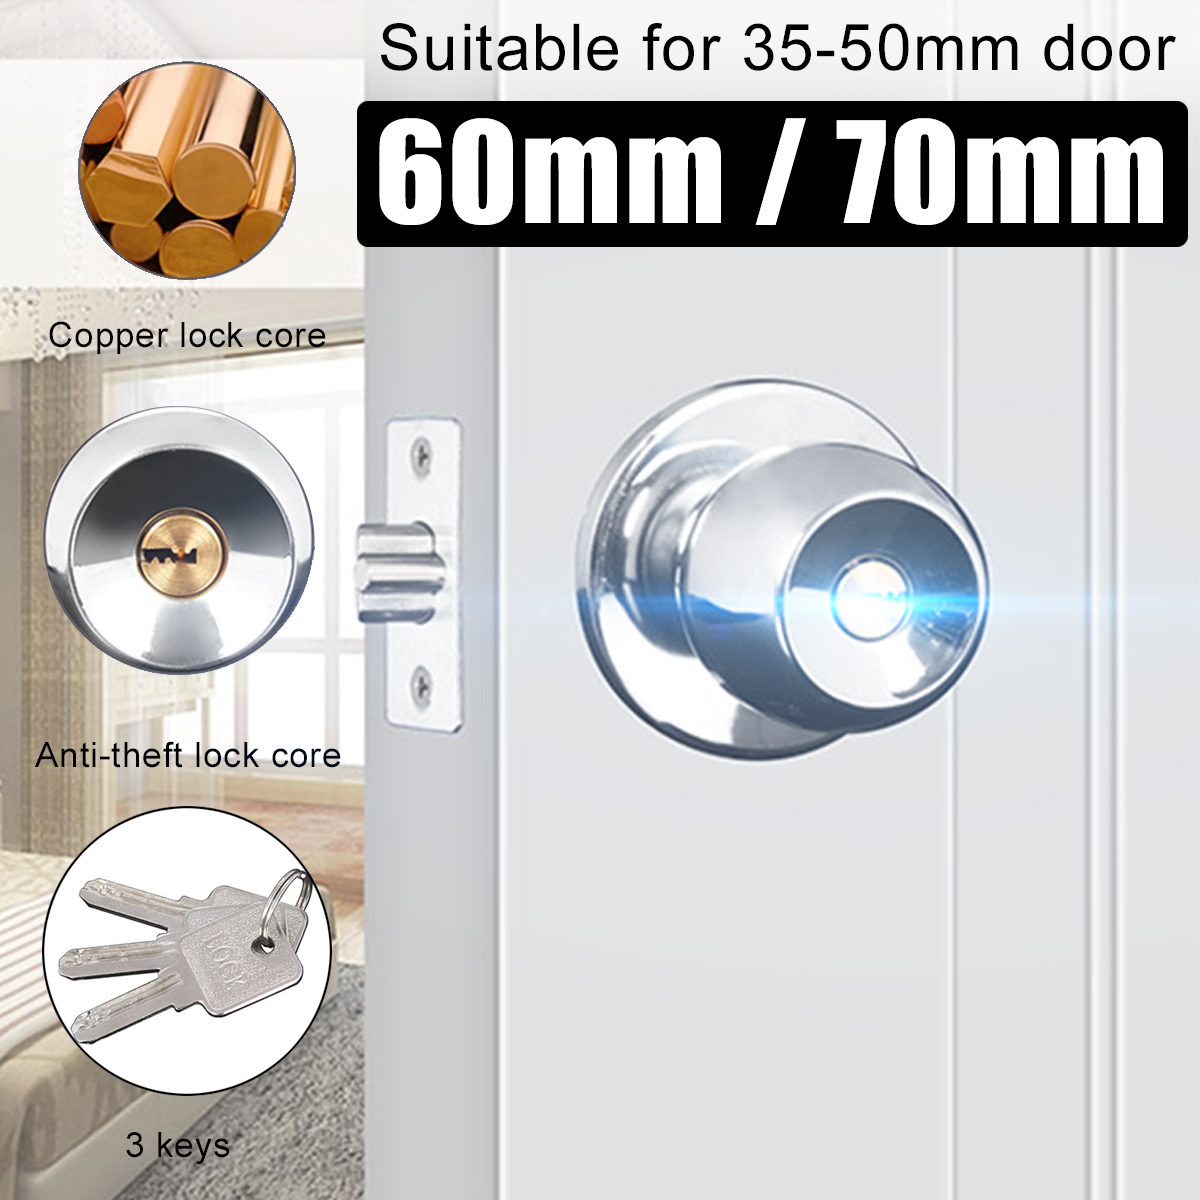 Stainless-Steel-Round-Door-Knobs-Privacy-Passage-Entrance-Lock-Entry-with-3-Keys-1680554-1